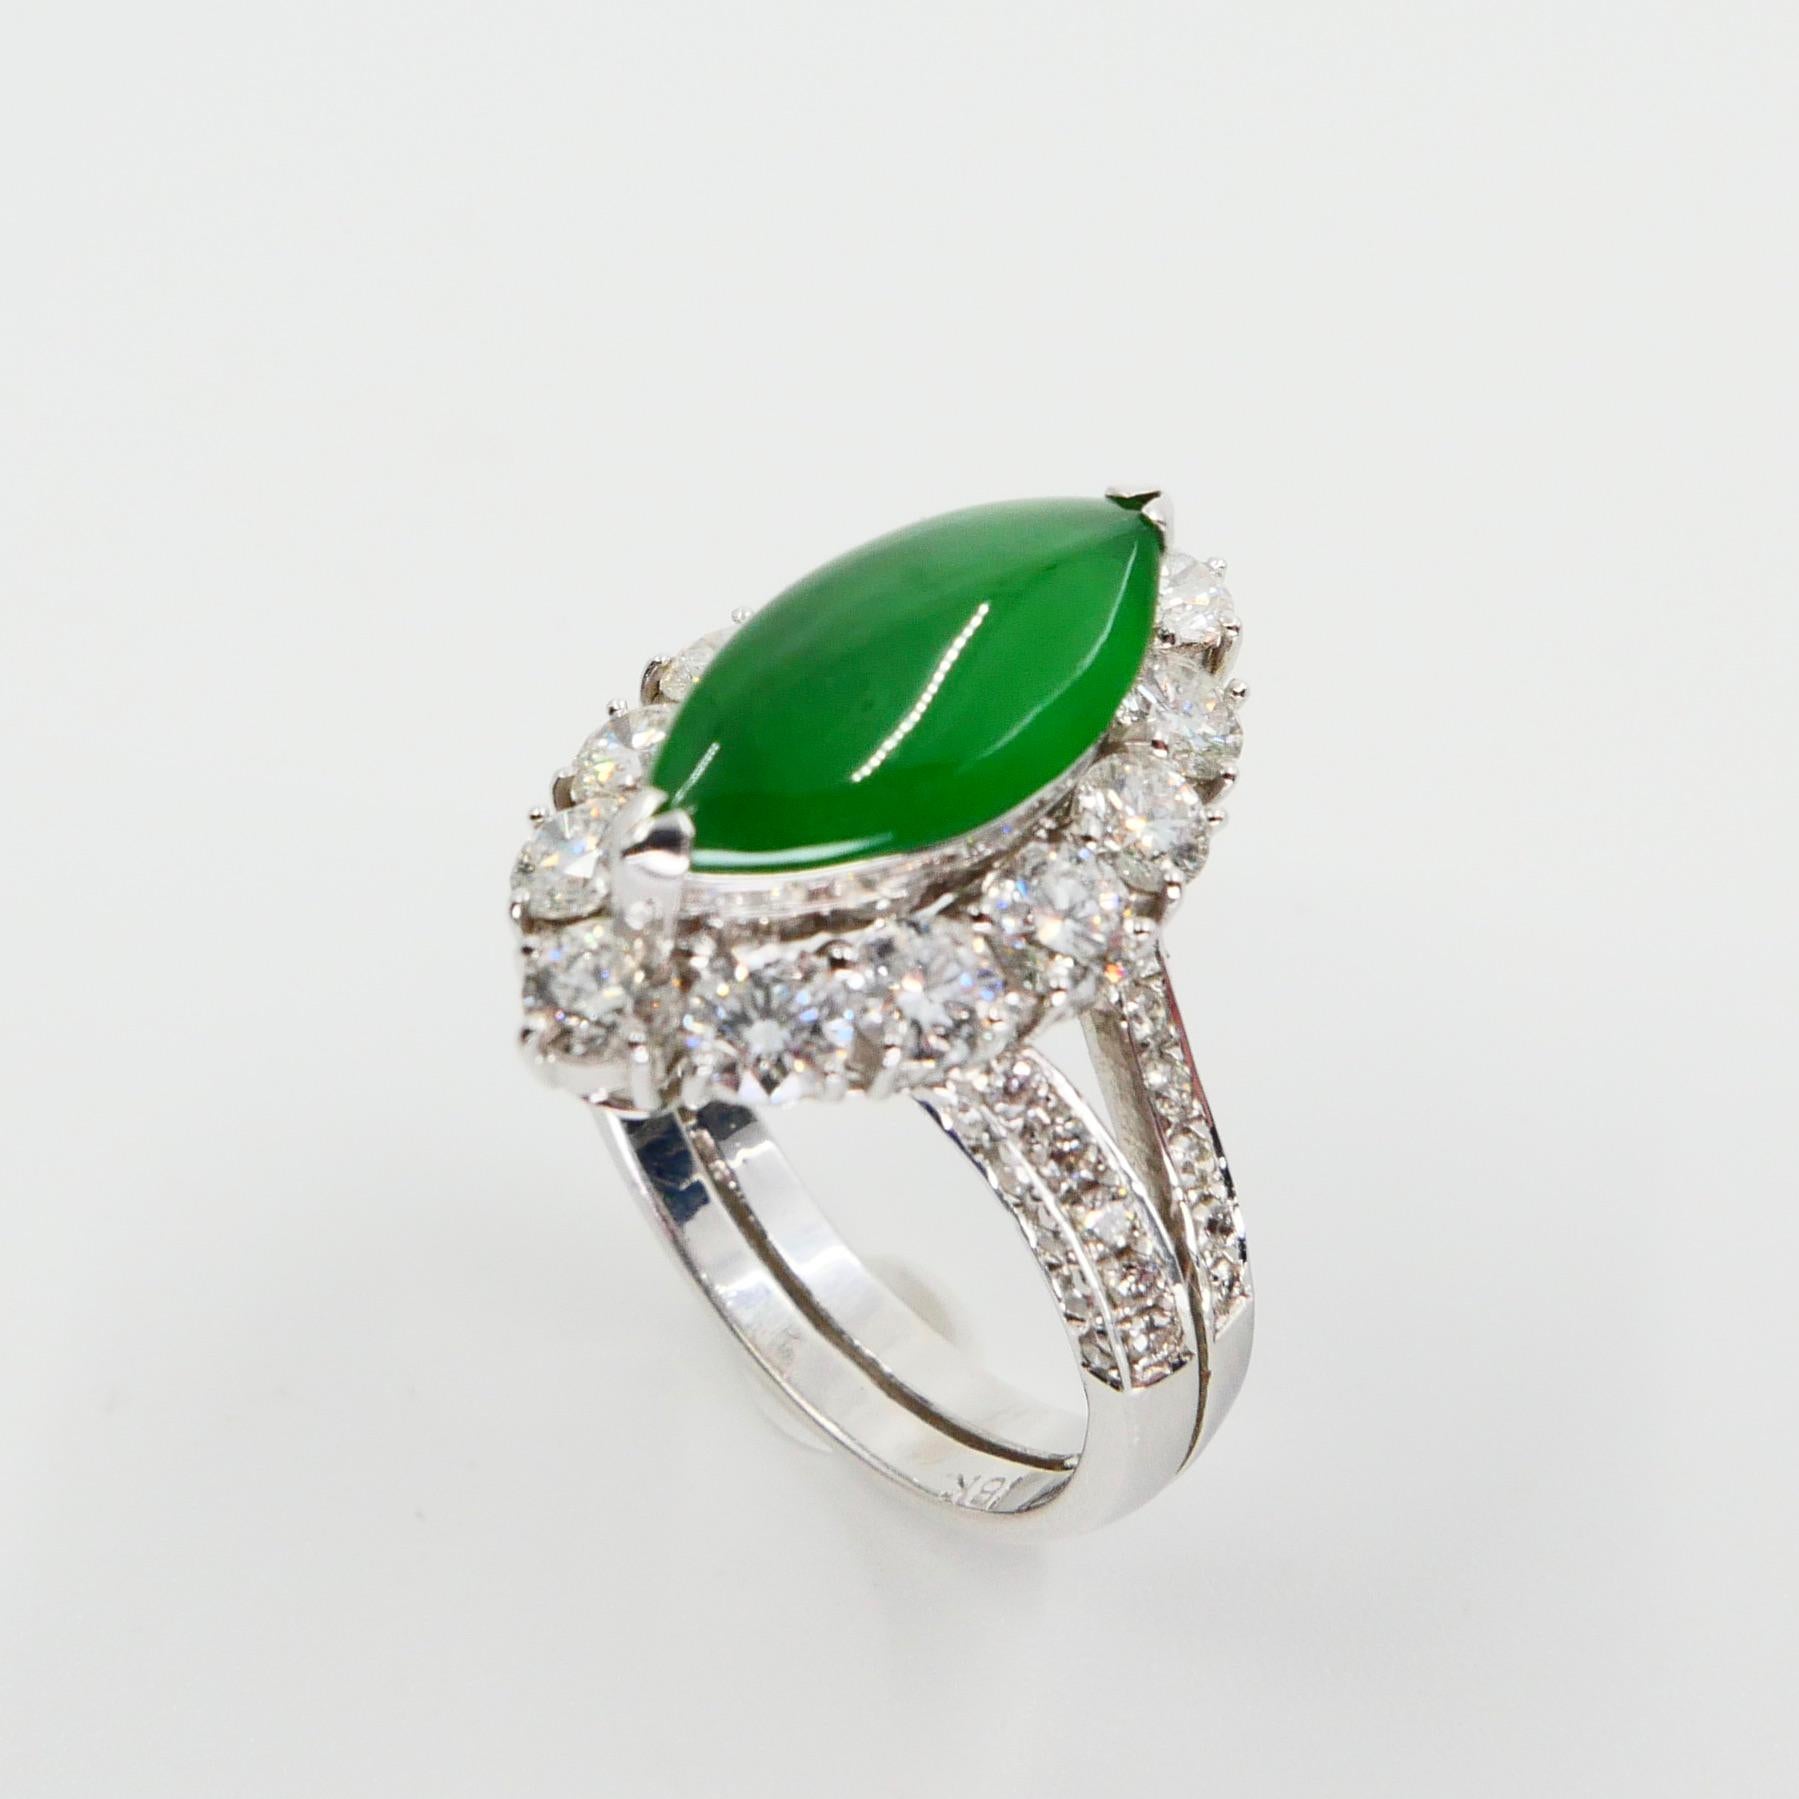 Certified Type A Jadeite Jade Diamond And Cocktail Ring, Imperial Green Color For Sale 5